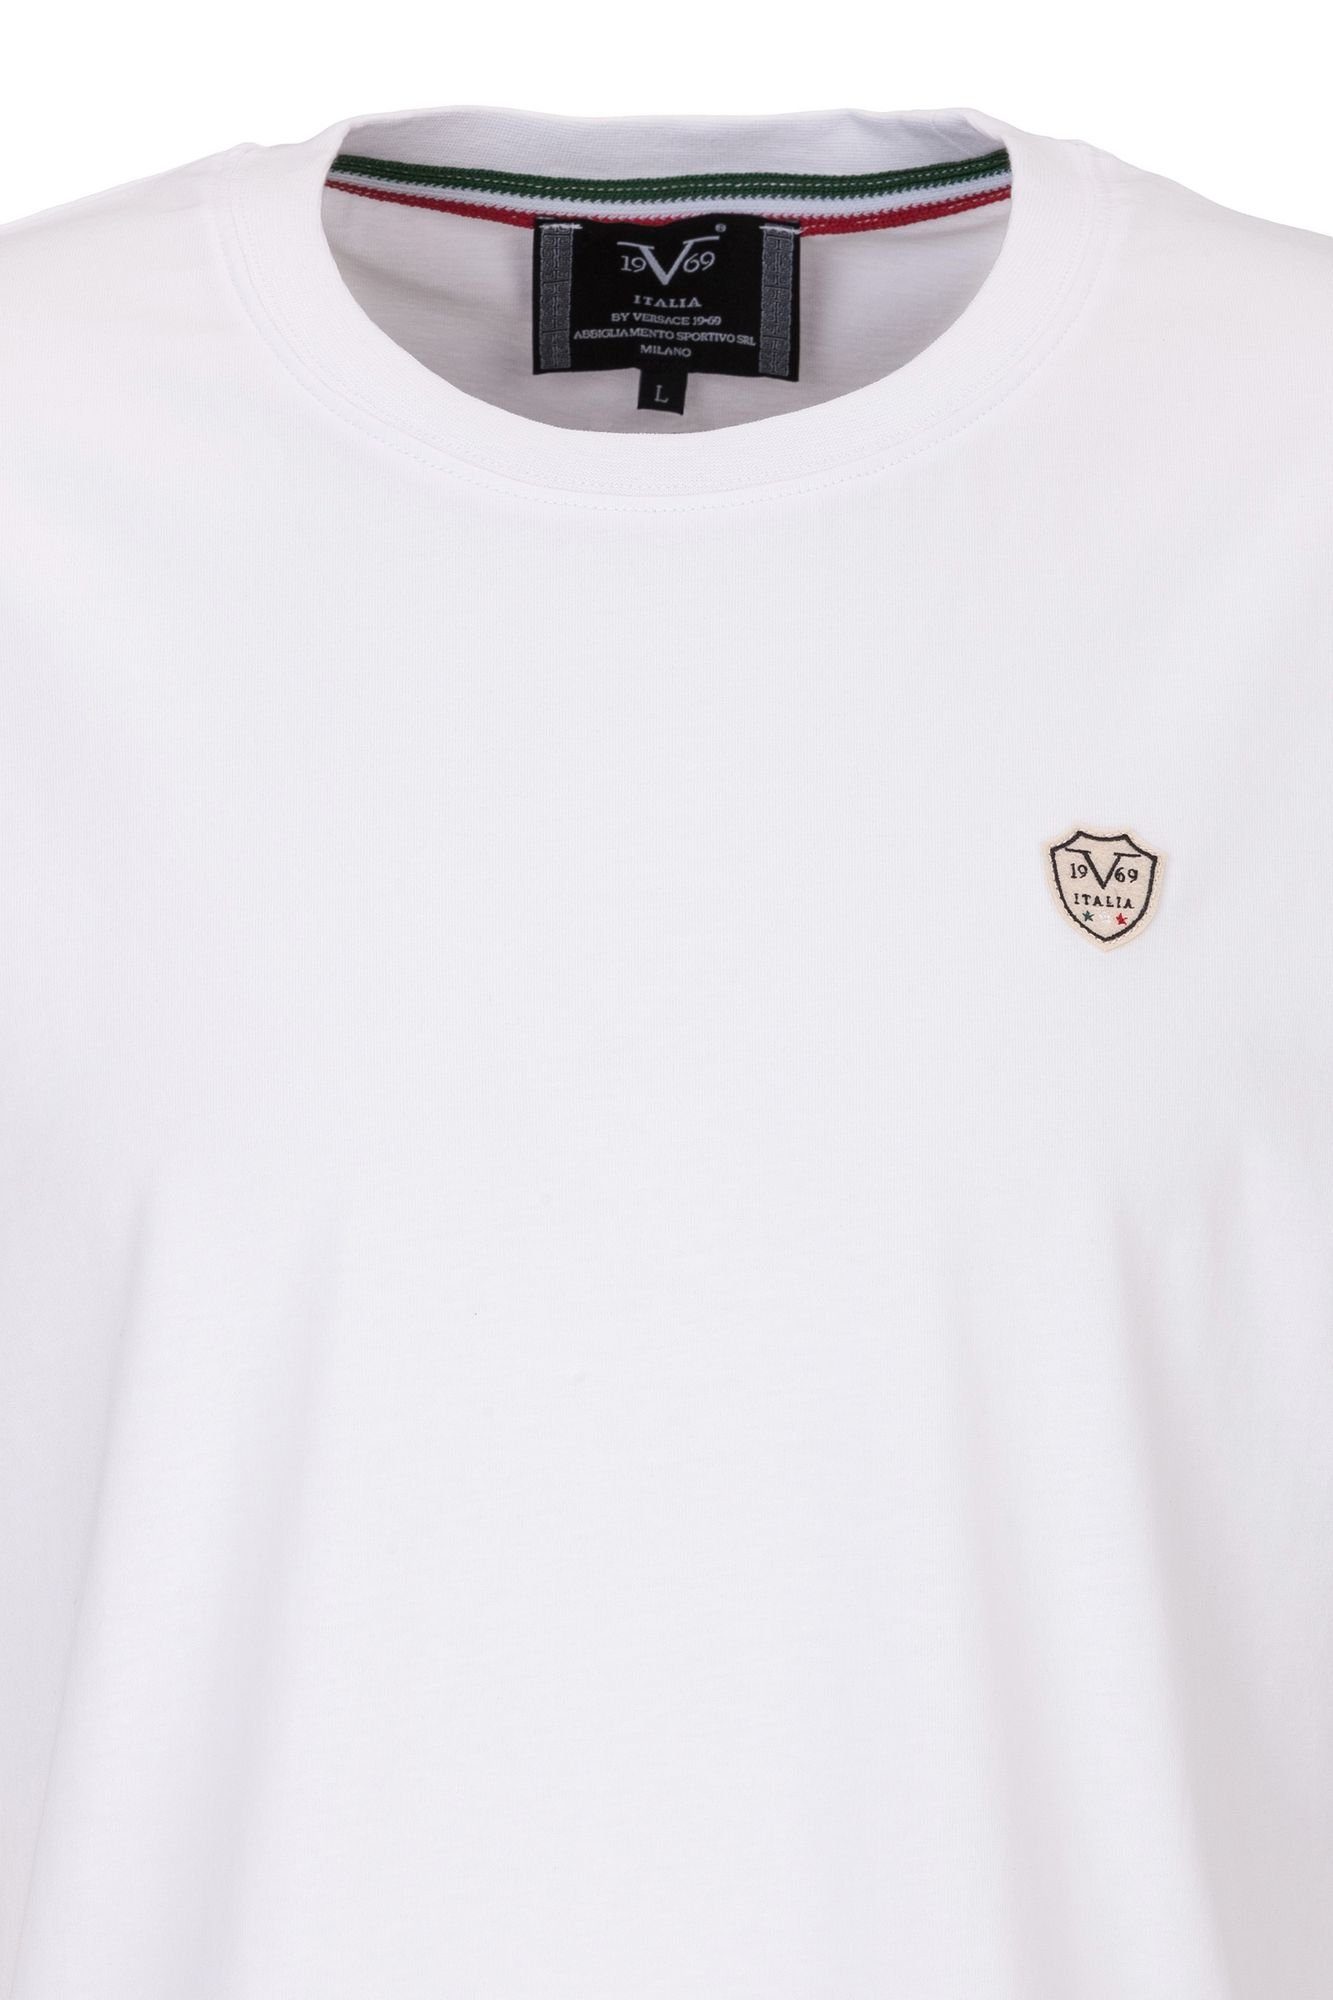 19V69 Italia by Versace T-Shirt WHITE Injection